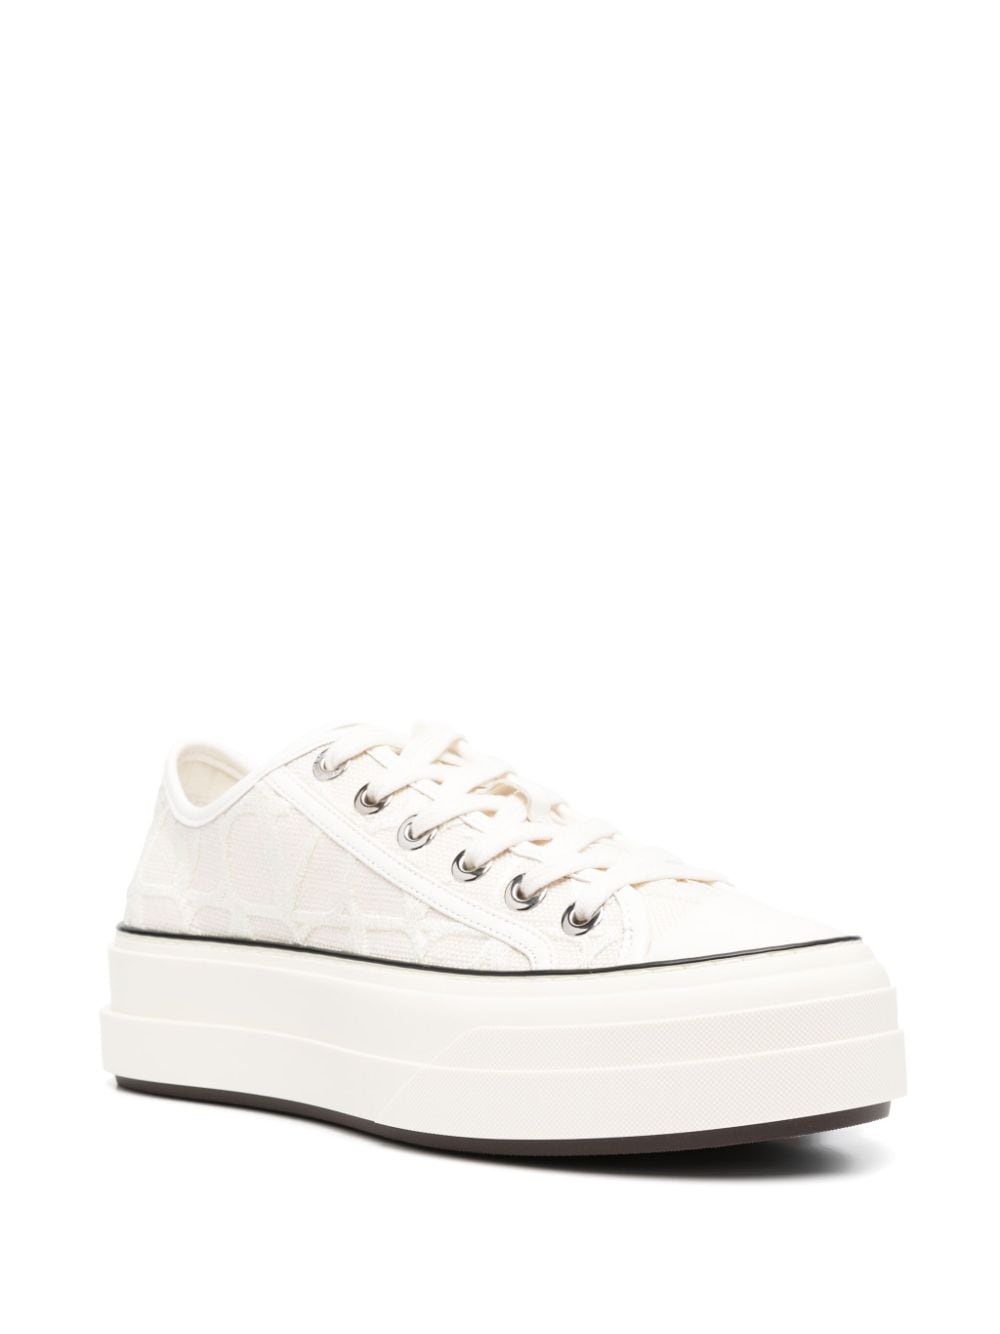 platform-sole lace-up sneakers - 2